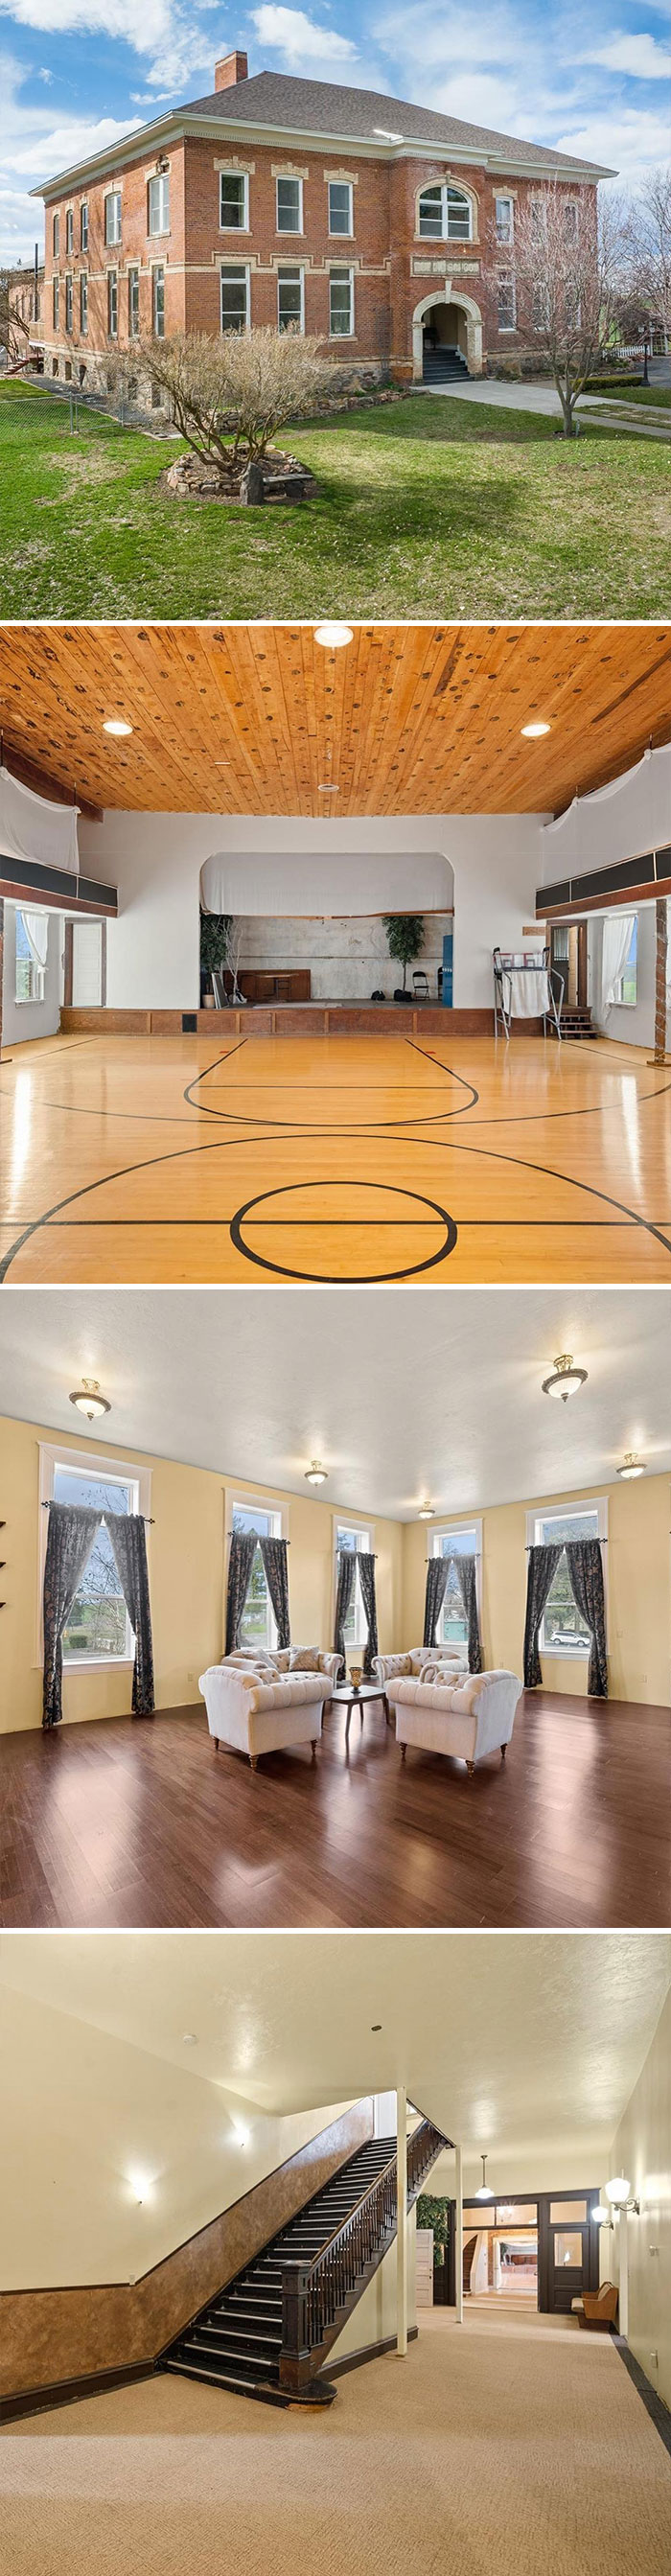 If You Have Ever Wanted To Live In A Converted Schoolhouse With An Attached Gymnasium/Theater Today Is Your Lucky Day Because For Only $699,000 This Latah, Wa Home Is Calling Your Name. The Home Has Over 8,700 Sq Ft On 1.43 Acres. 5 Bd, 6 Ba. 1.43 Acres